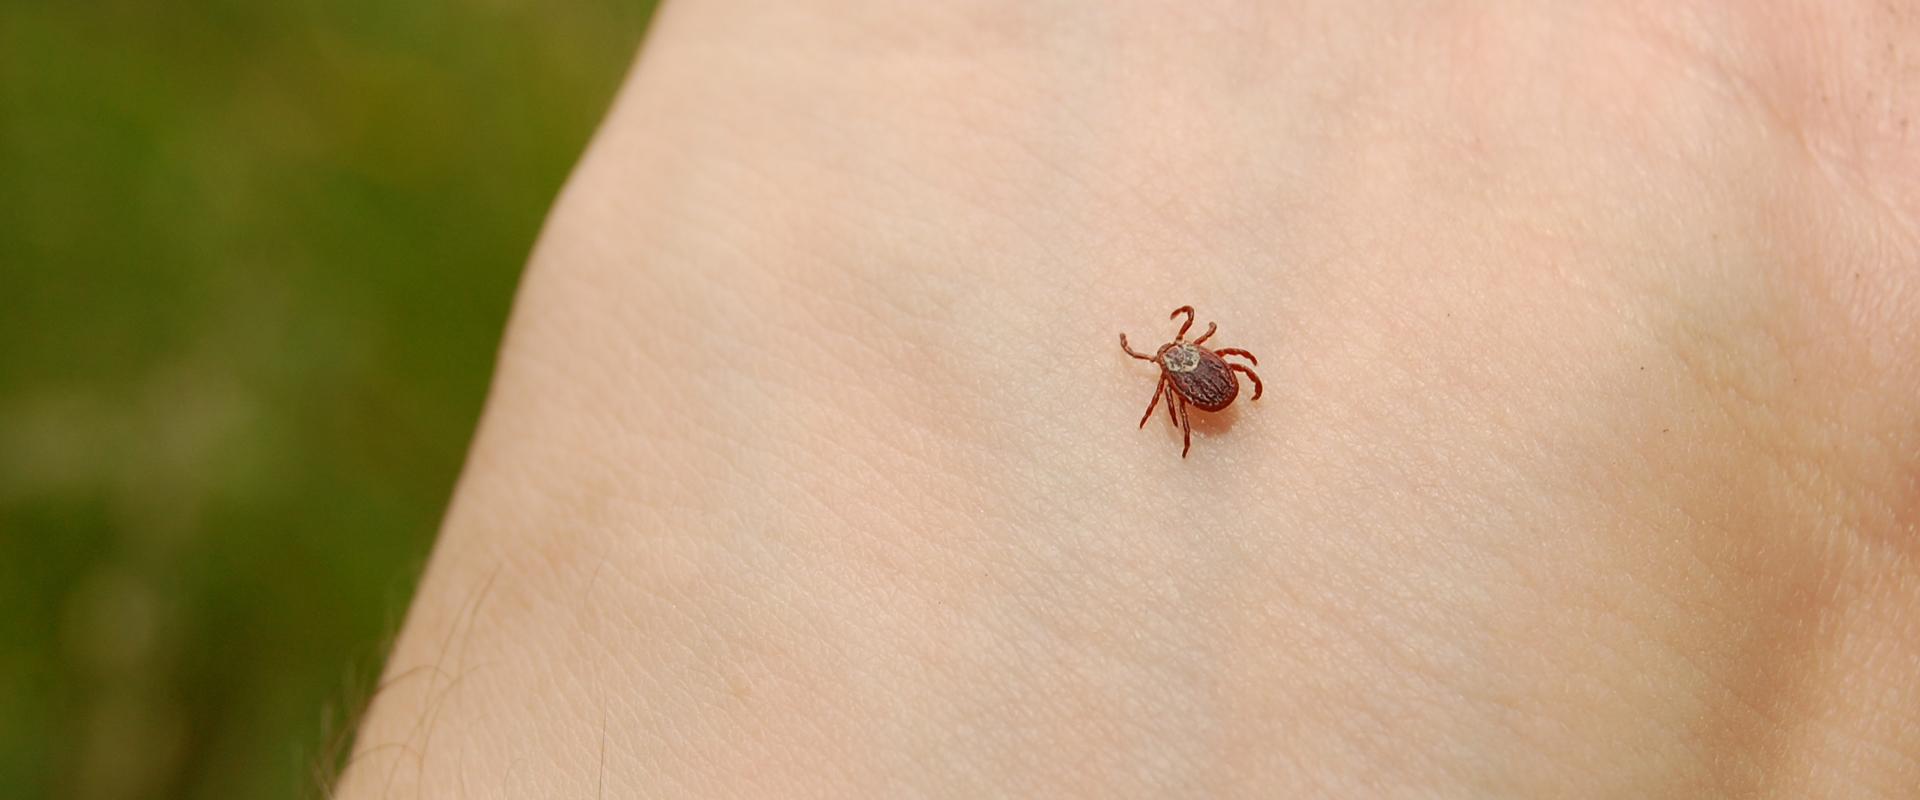 a tick on a persons wrist